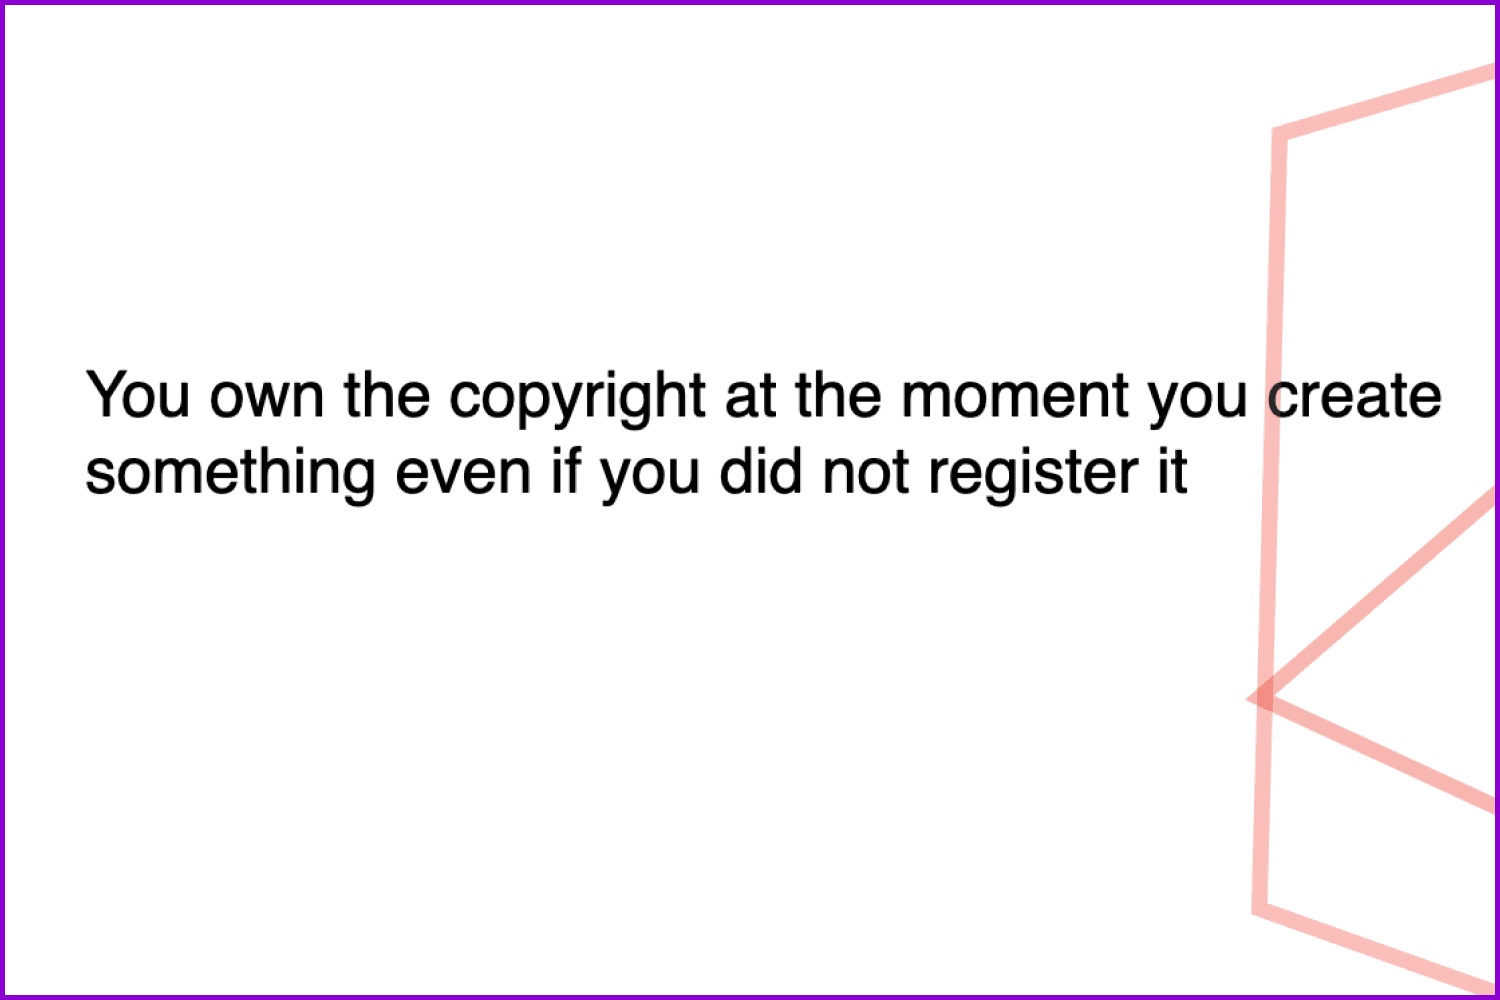 you owe the copywrite at the moment when you create something.